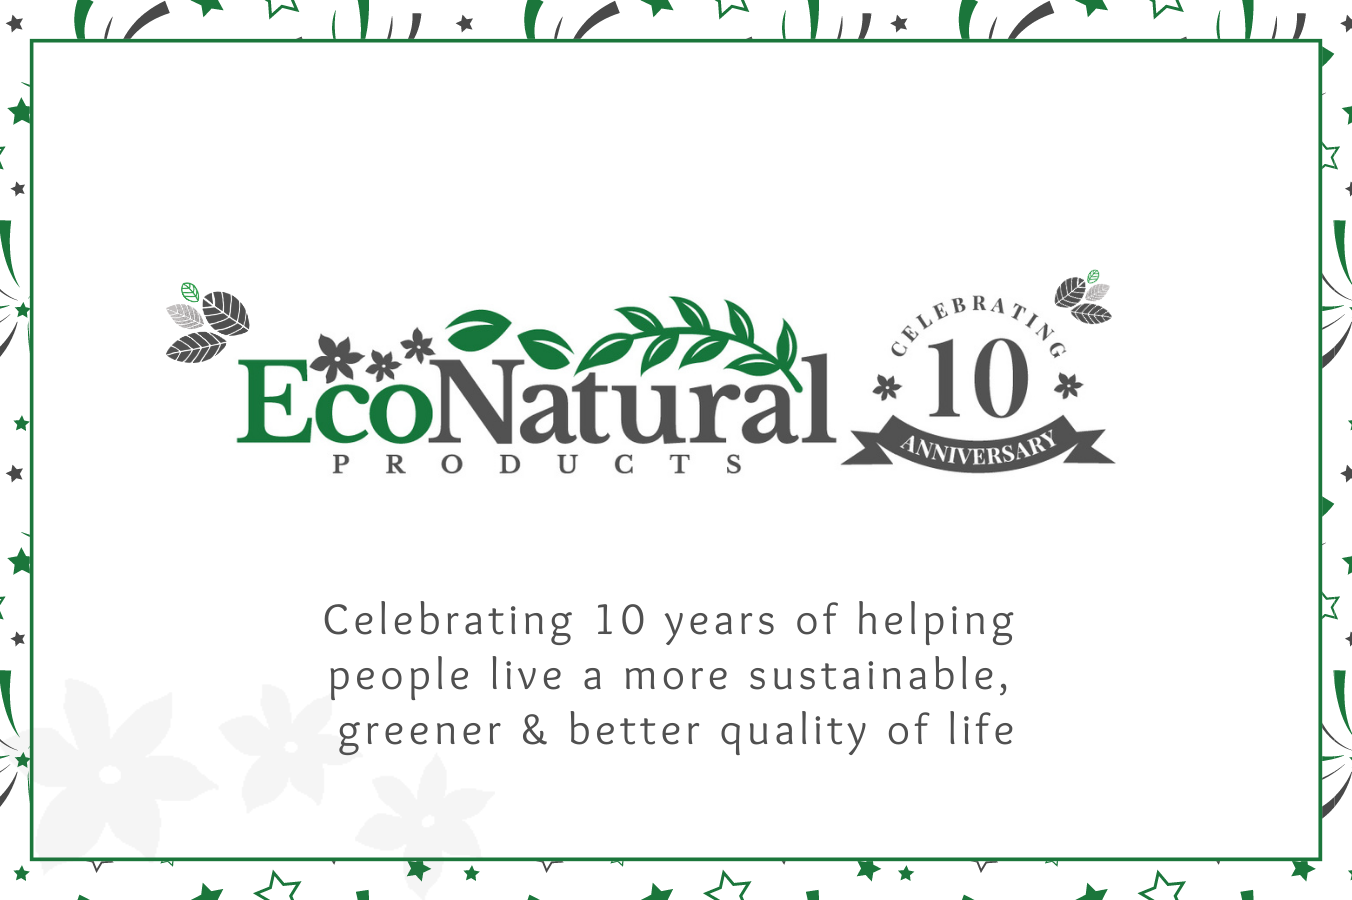 Eco Natural Products turns 10